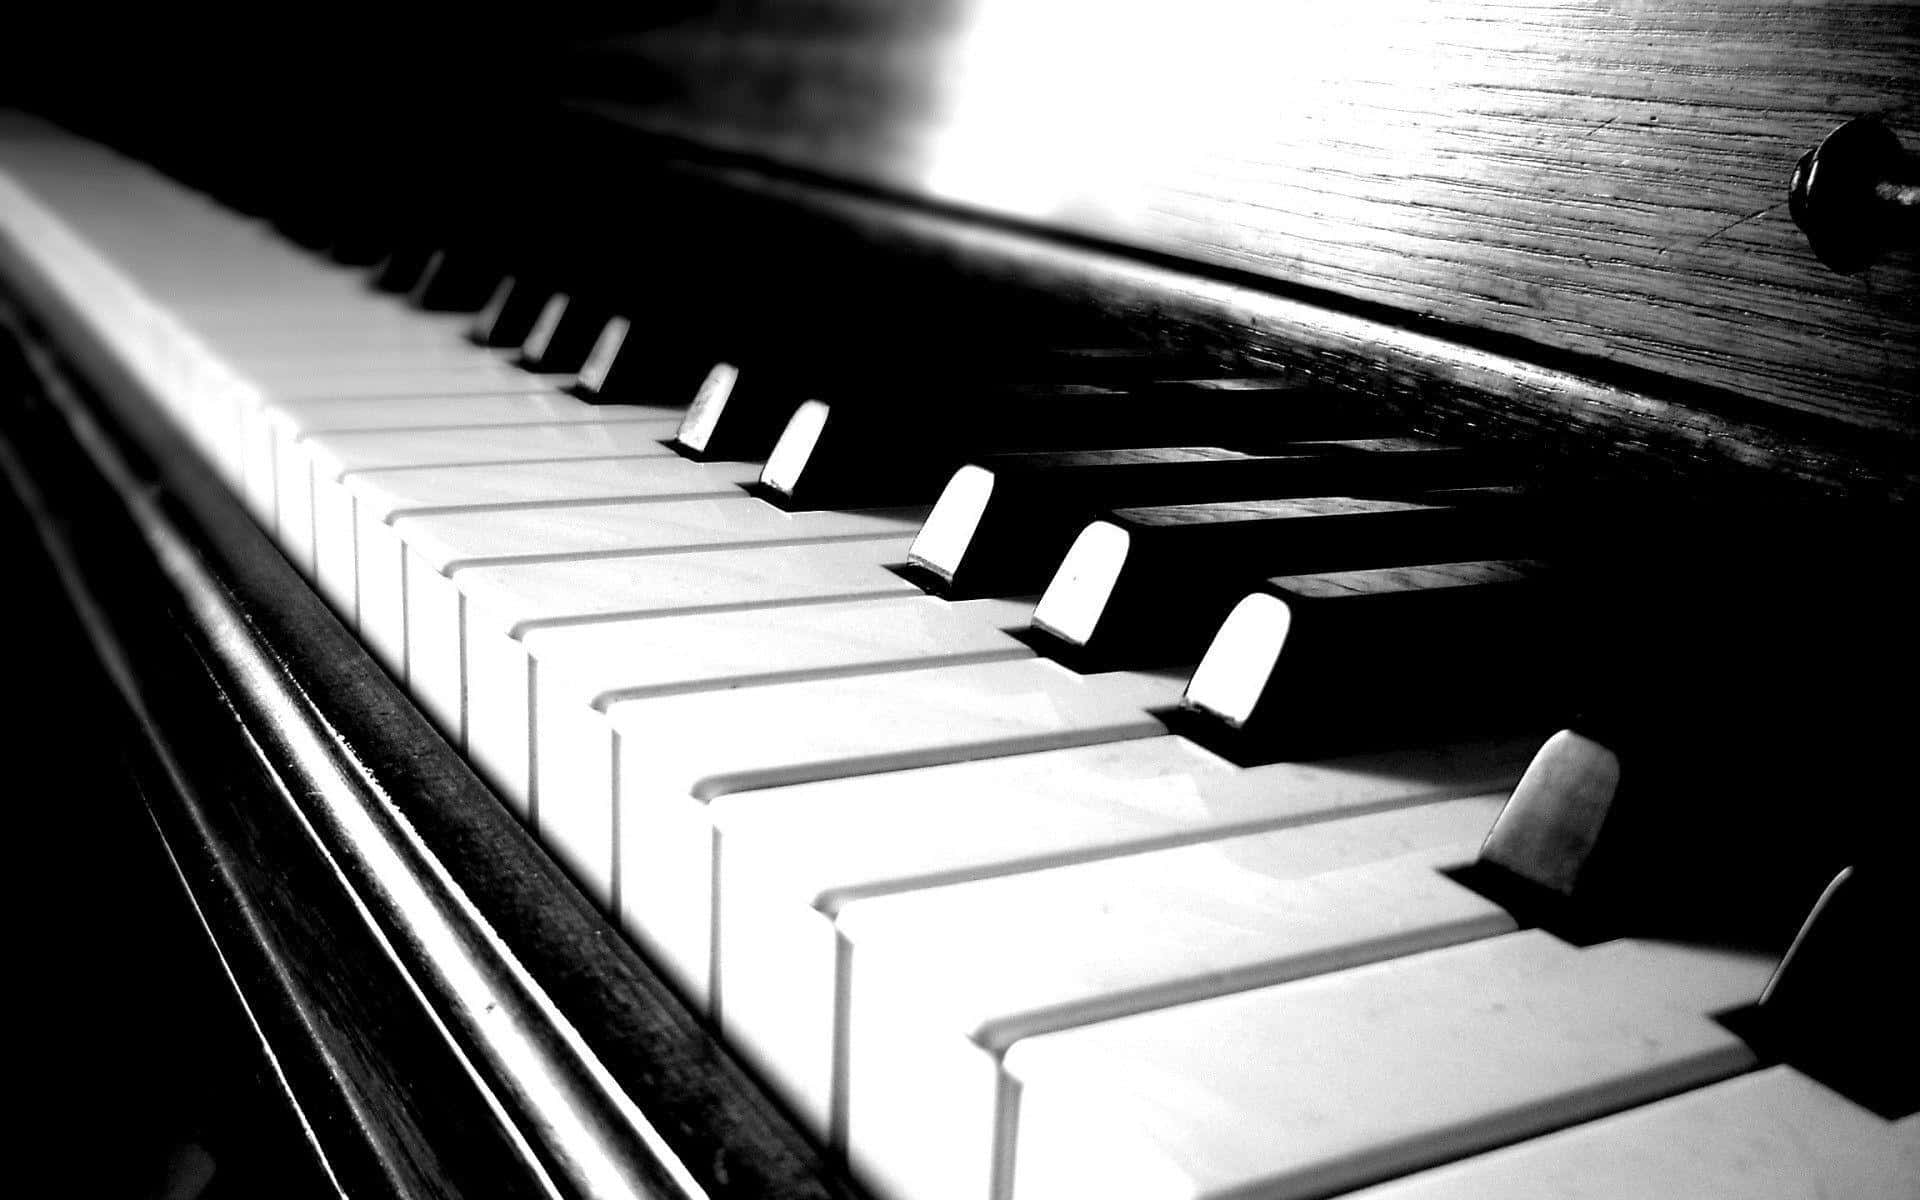 "Let the beauty of music fill your soul with a Piano in the background."